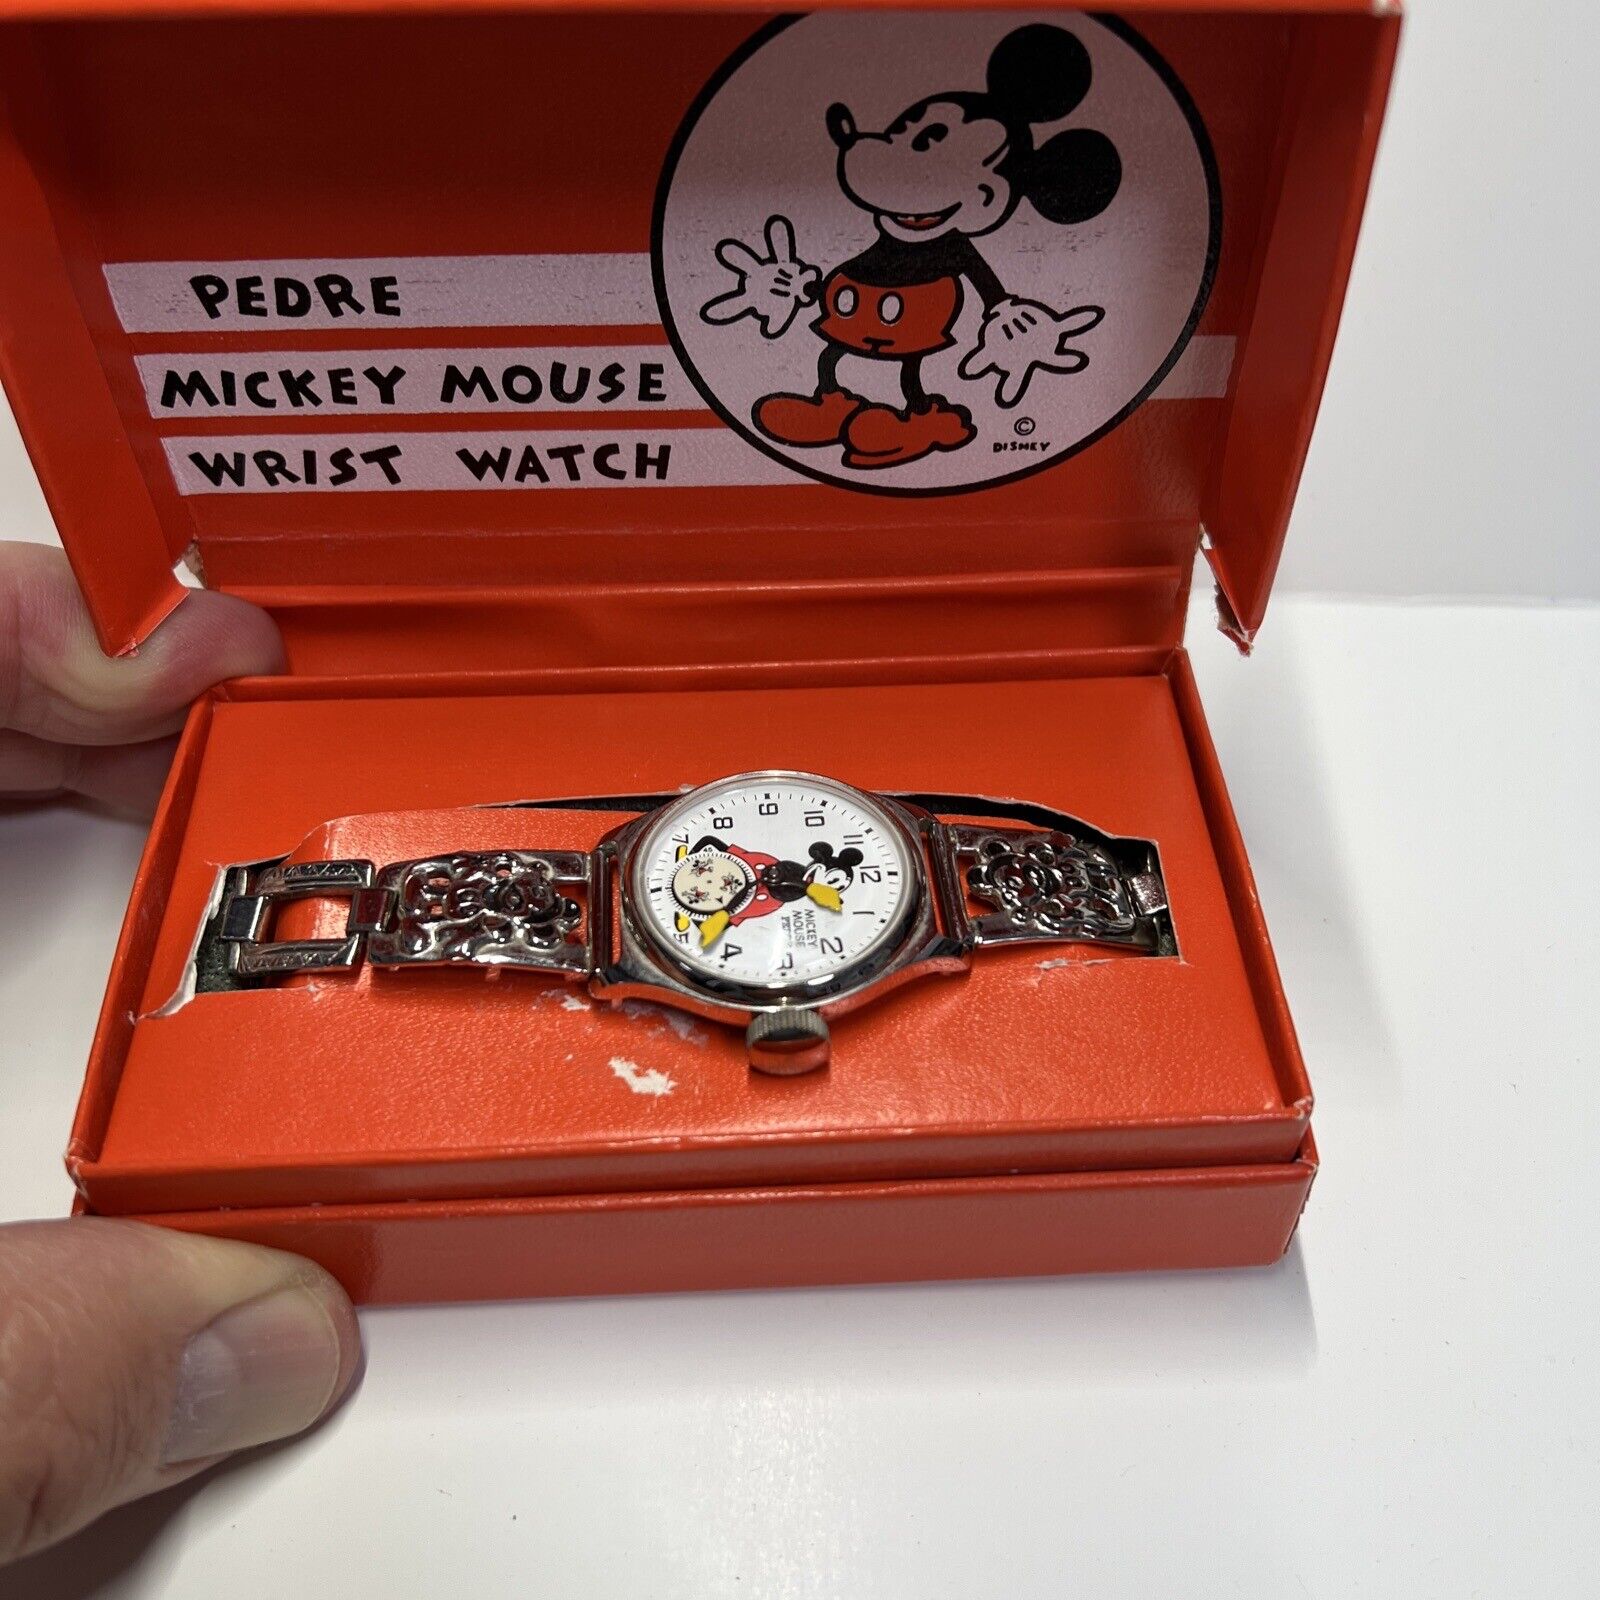 NEW  NEVER WORN 1990 DISNEY Pedre MICKEY MOUSE WRIST WATCH *  VERY LIMITED 